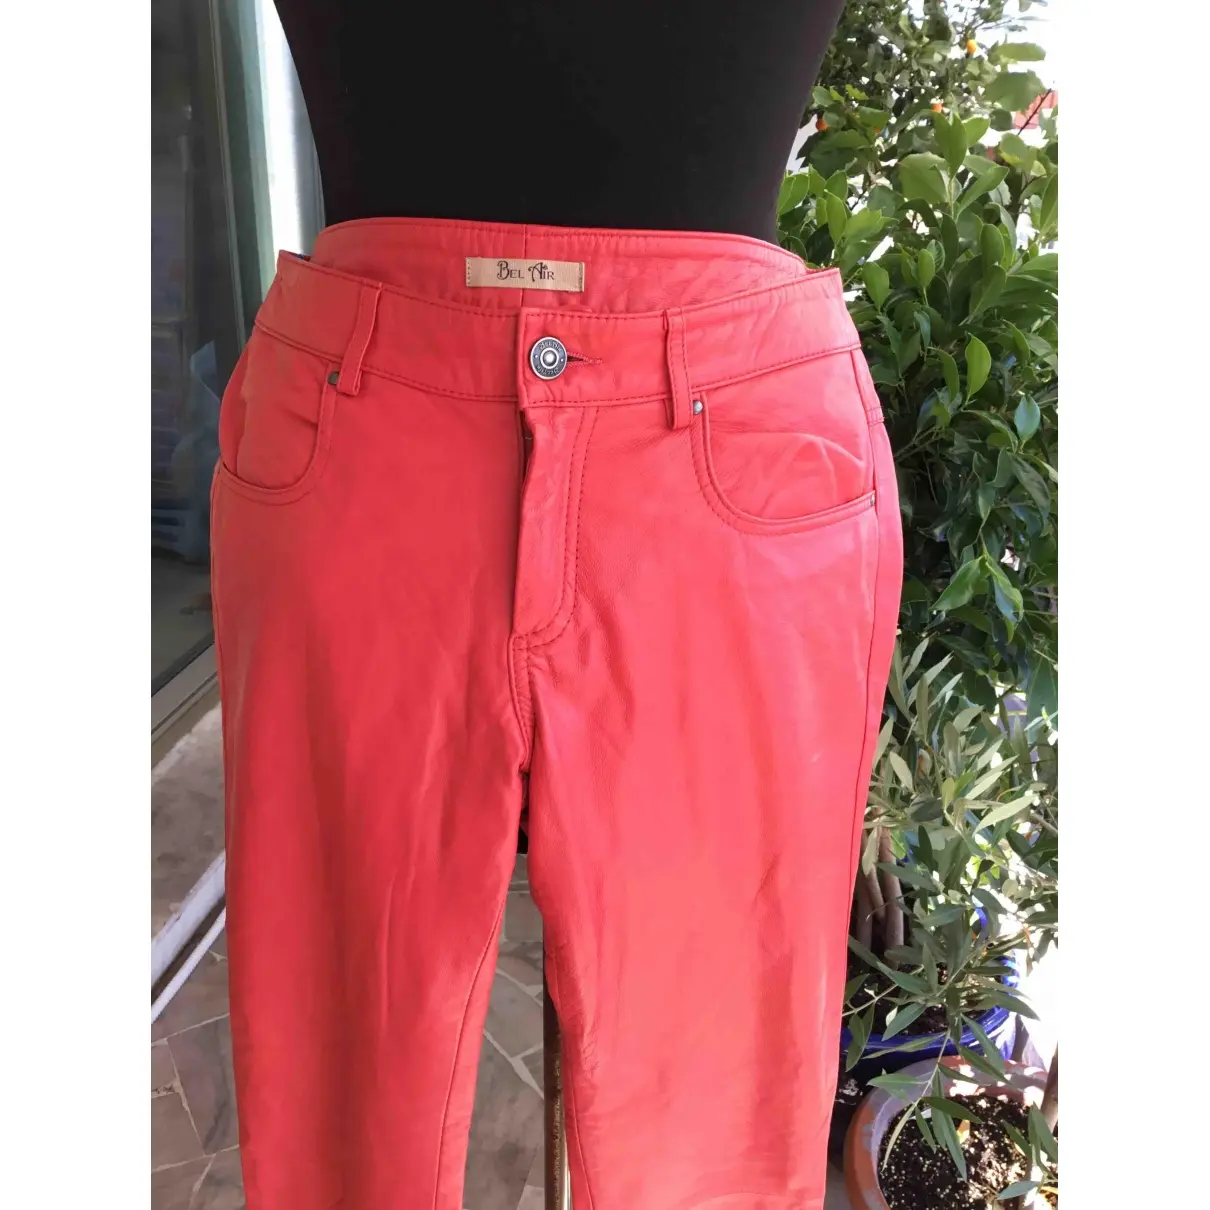 Bel Air Leather slim pants for sale